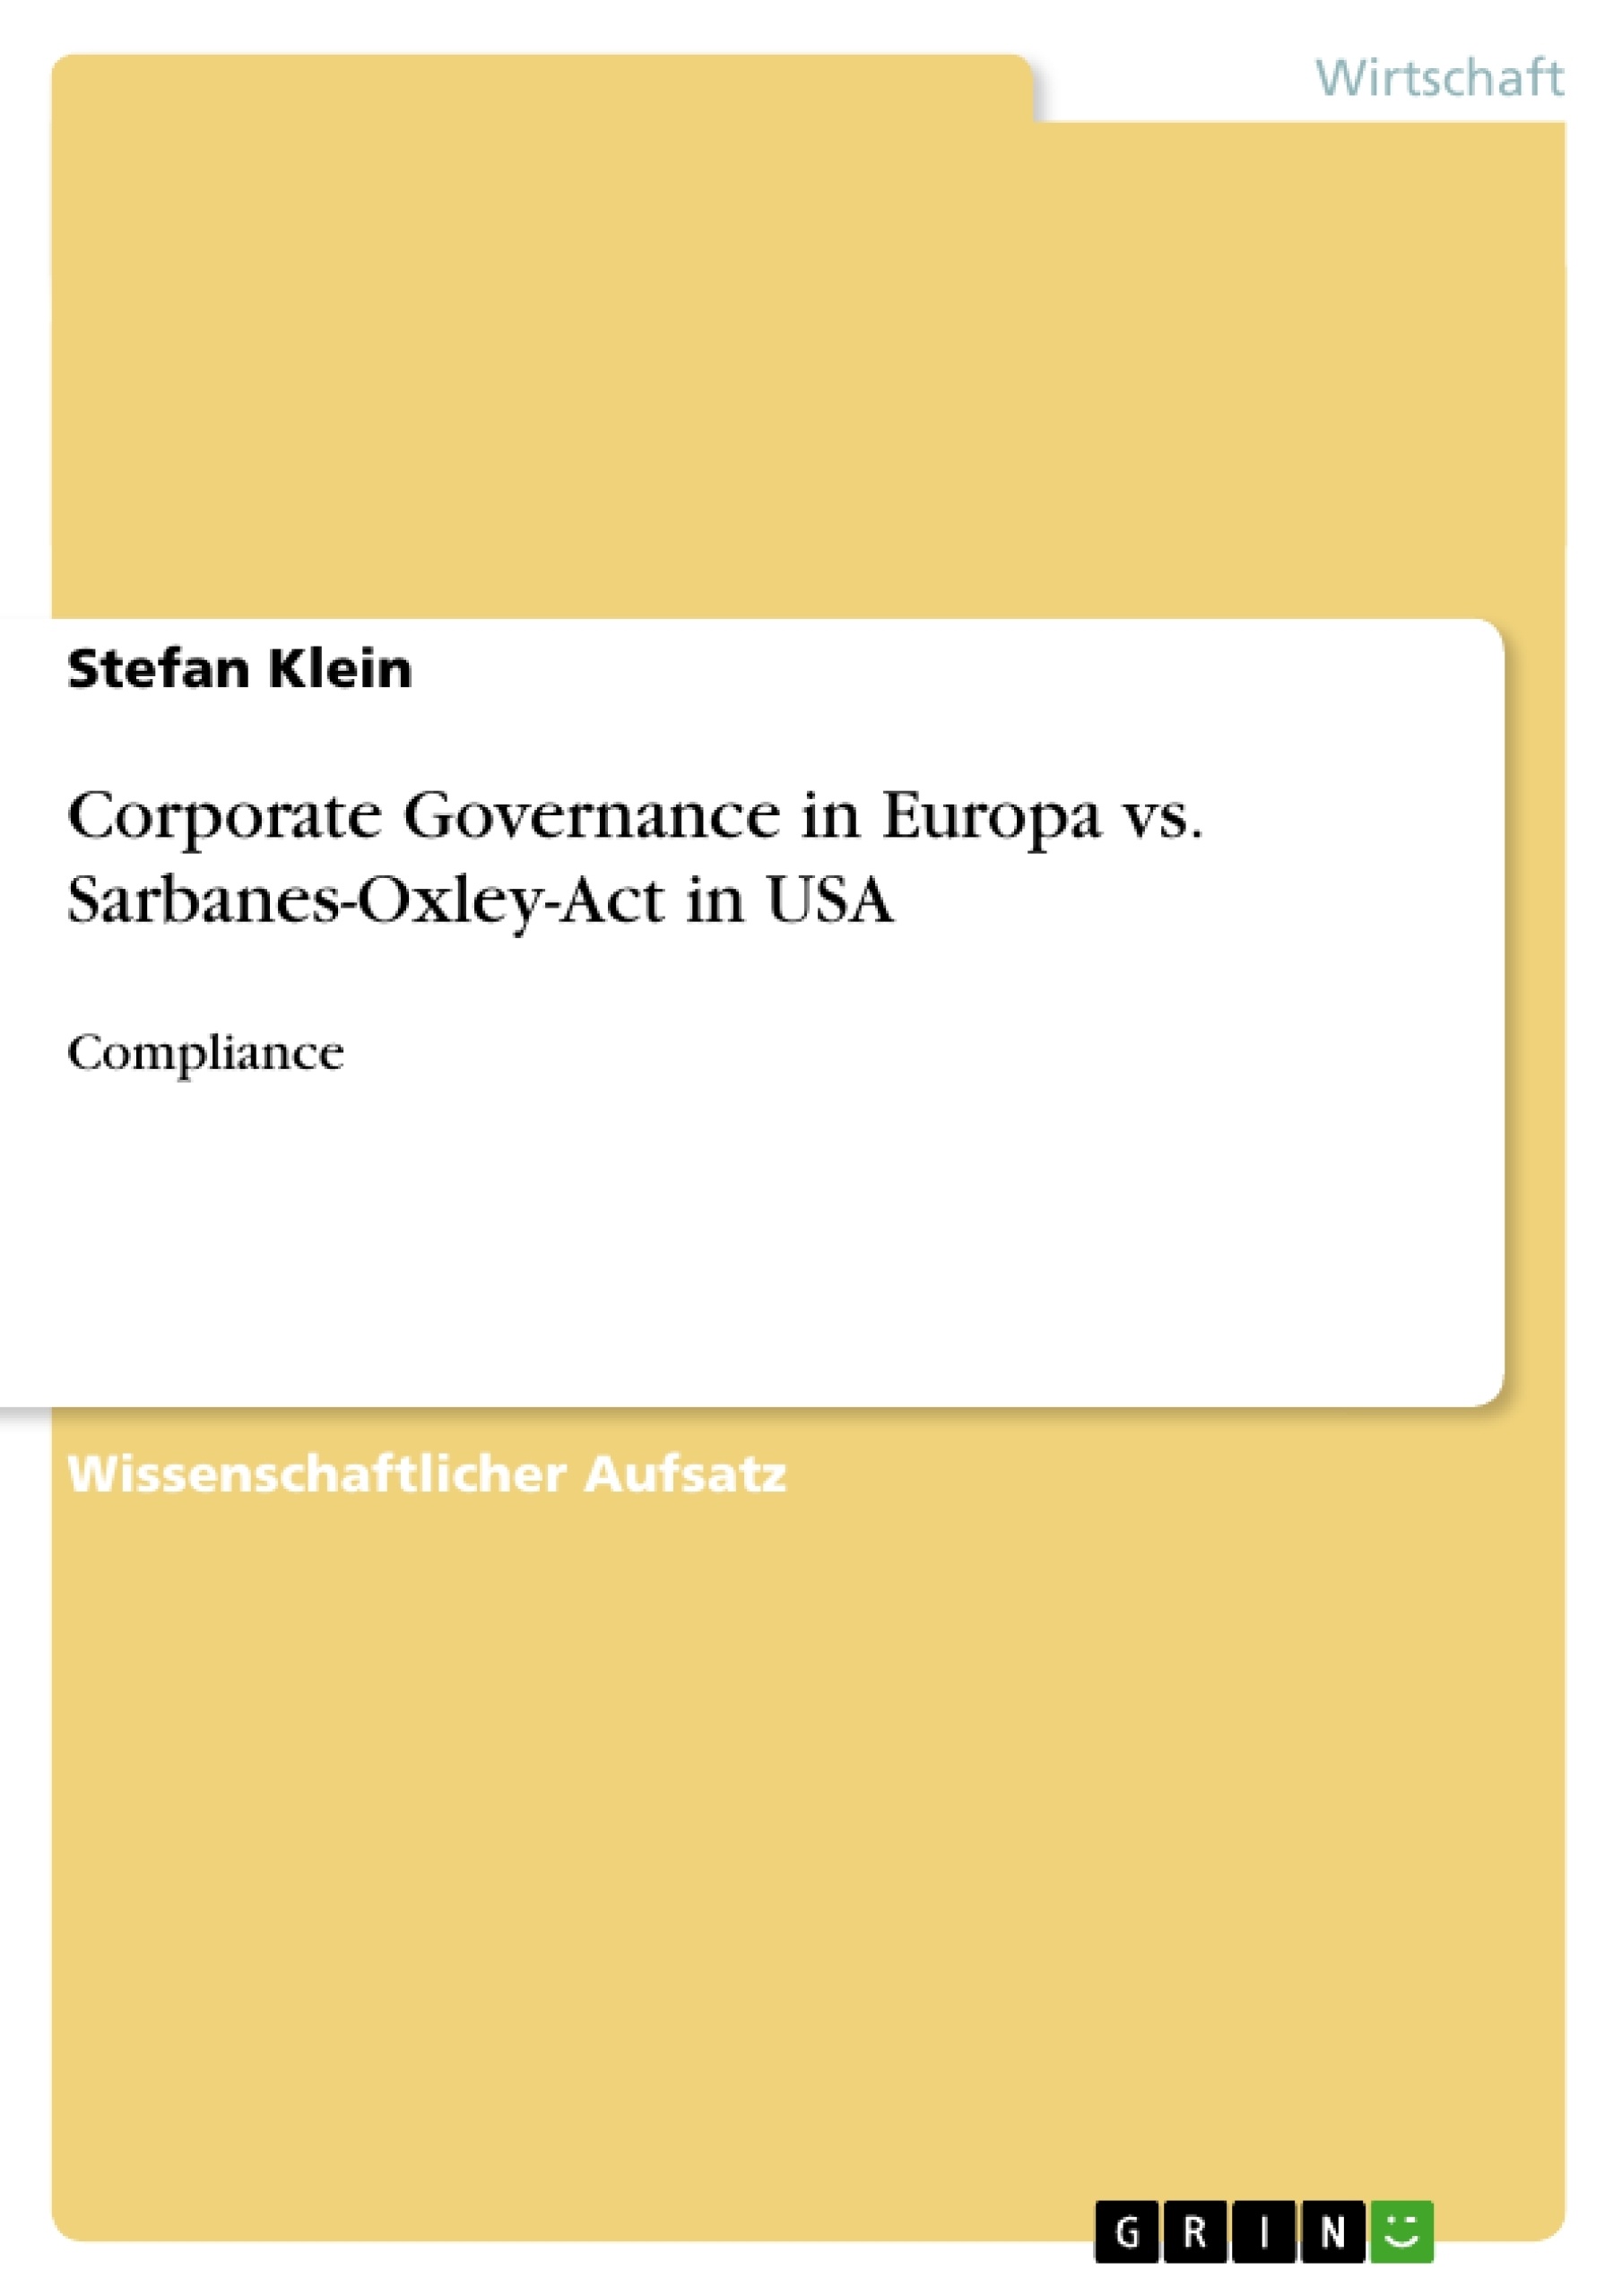 Titel: Corporate Governance in Europa vs. Sarbanes-Oxley-Act in USA